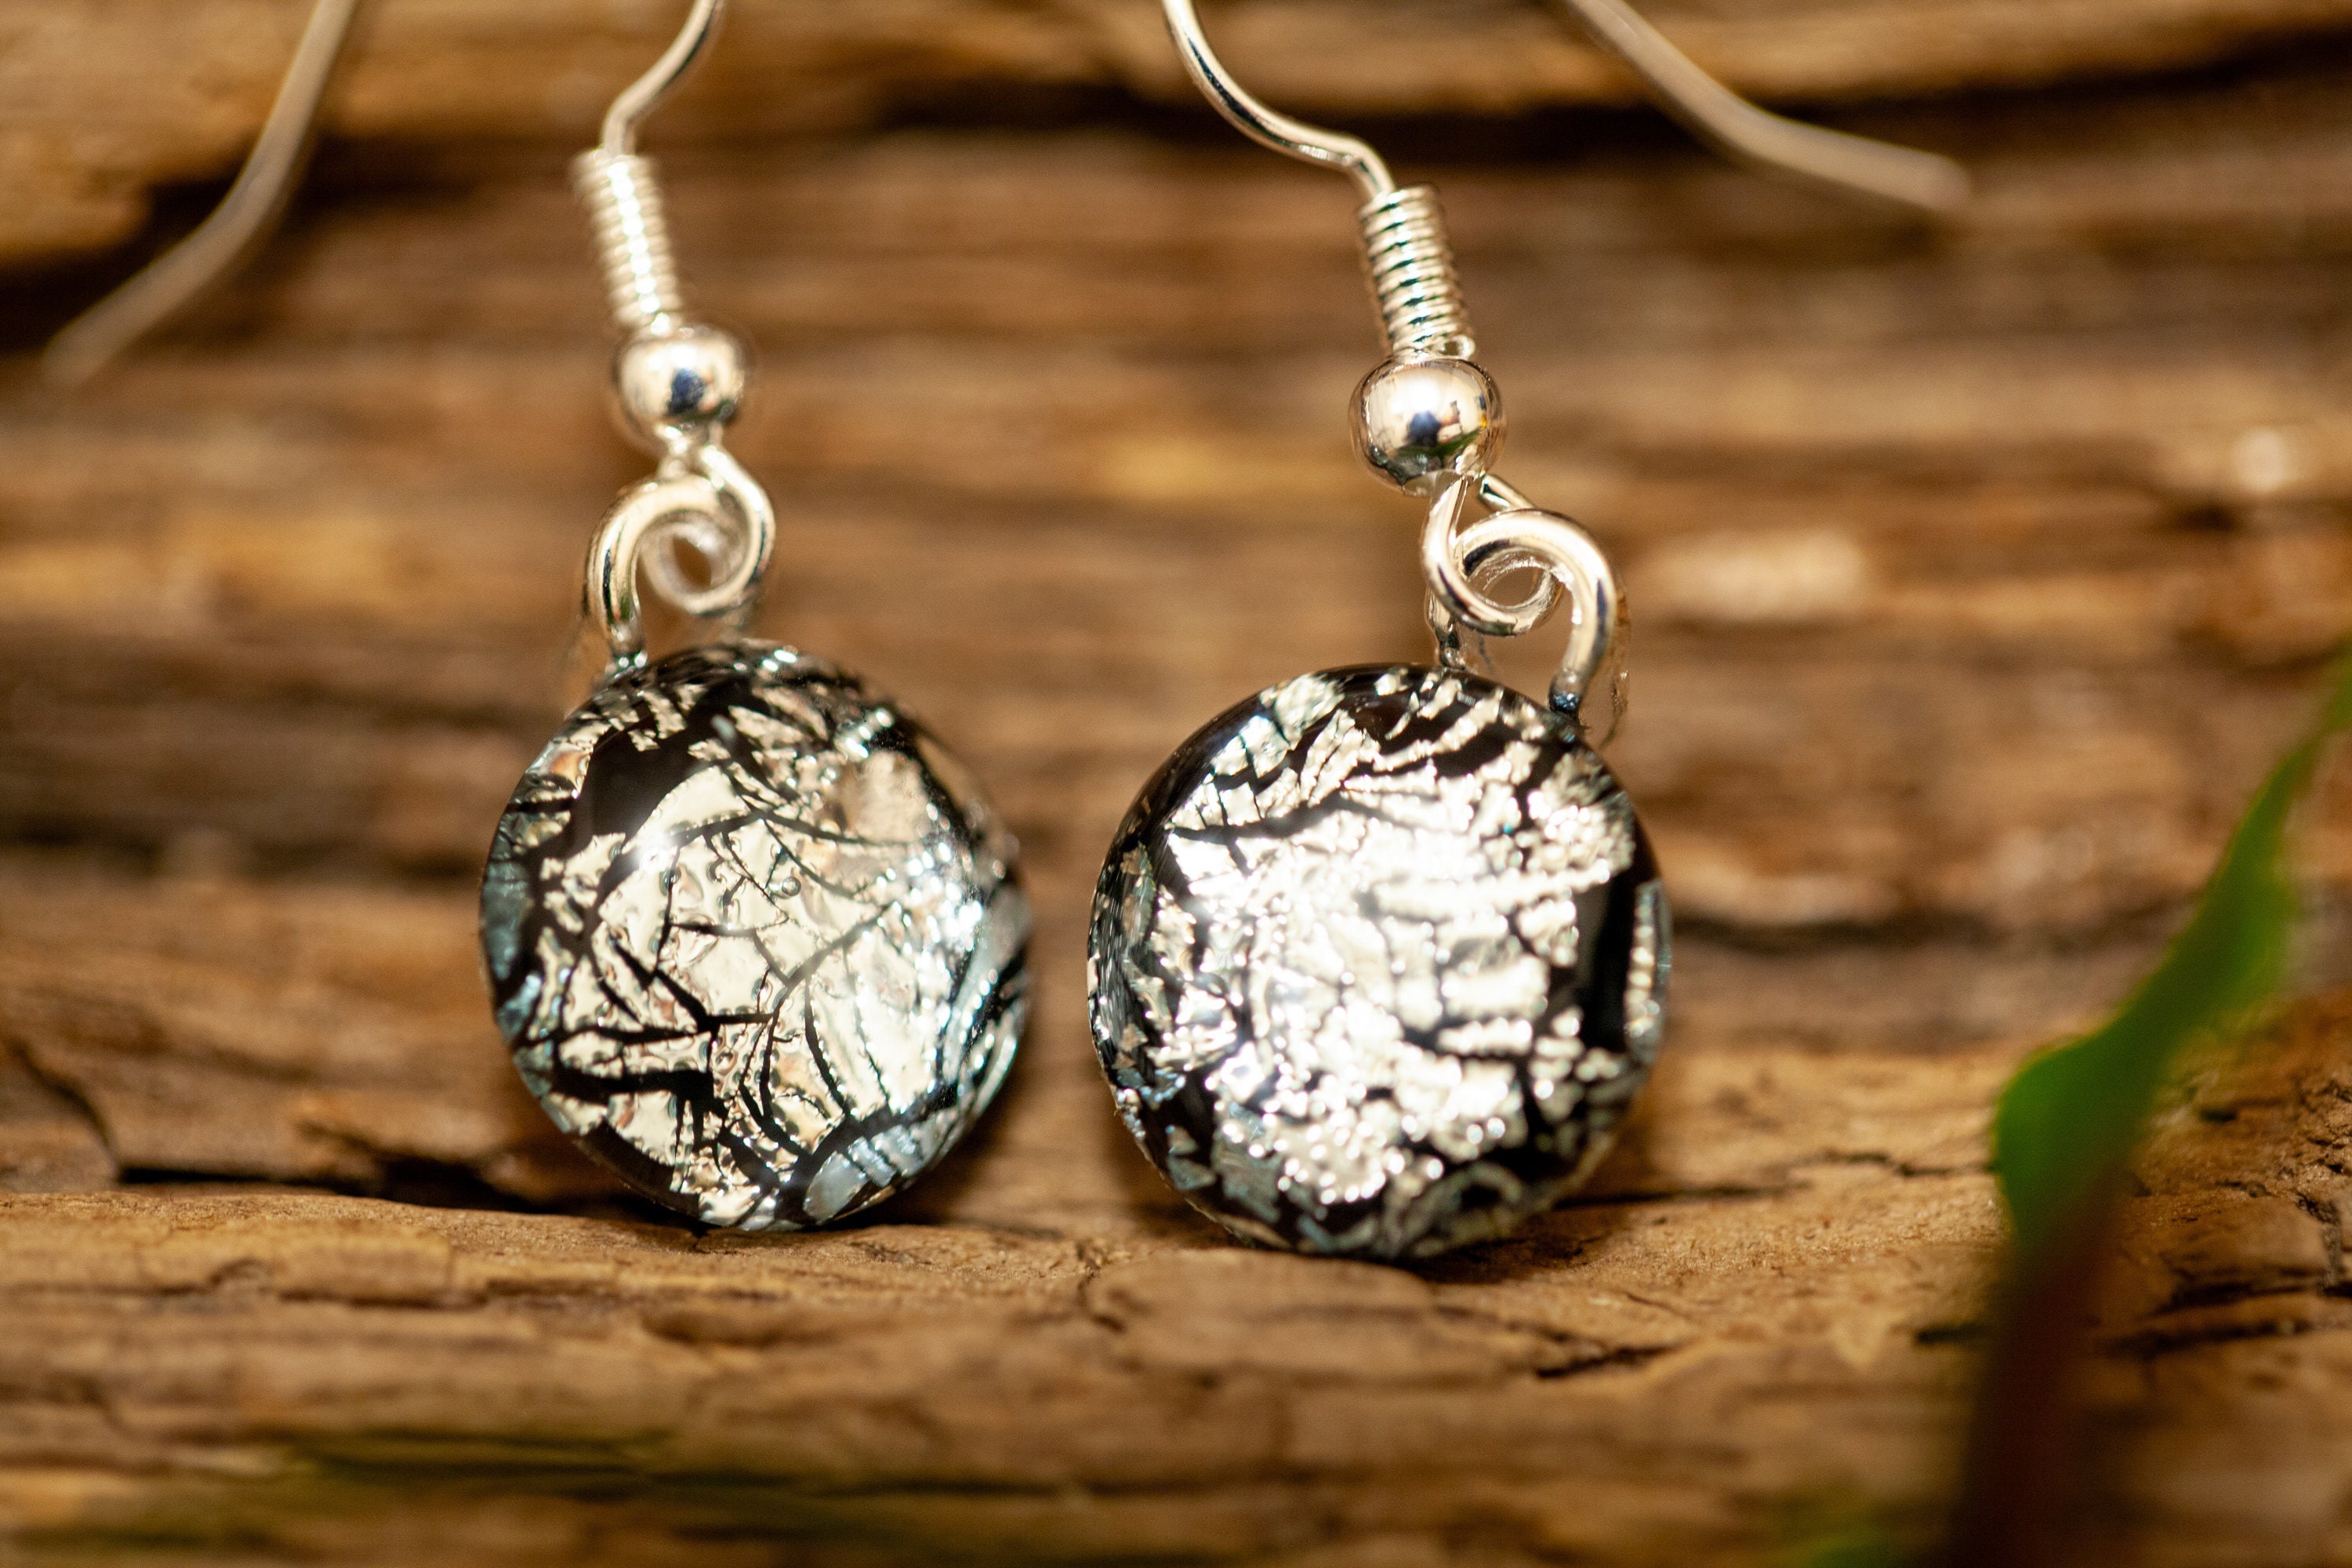 Handmade Shimmering Silver Fused Glass Drop Earrings | Sparkling Jewellery Dichroic Plated